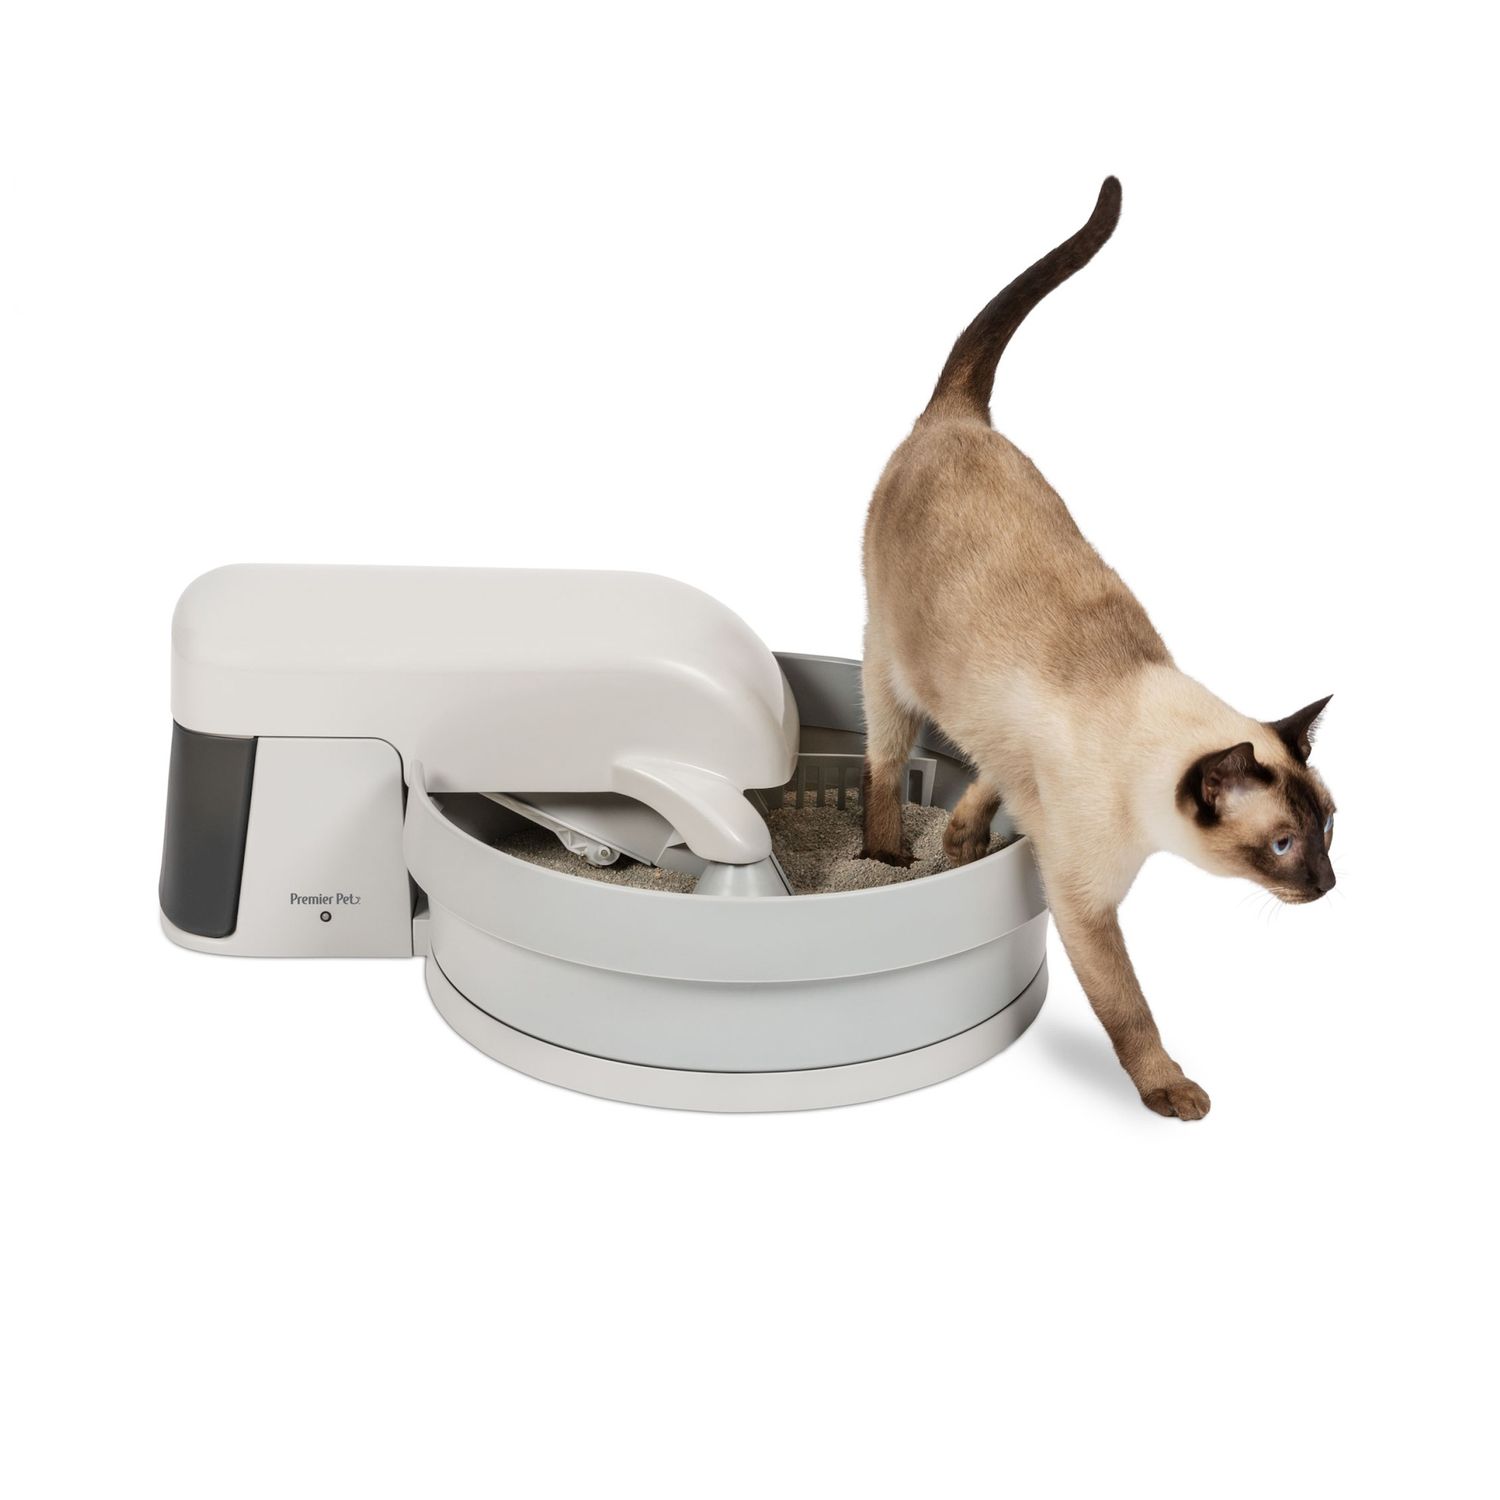 9 of the Best SelfCleaning Automatic Cat Litter Boxes on the Market